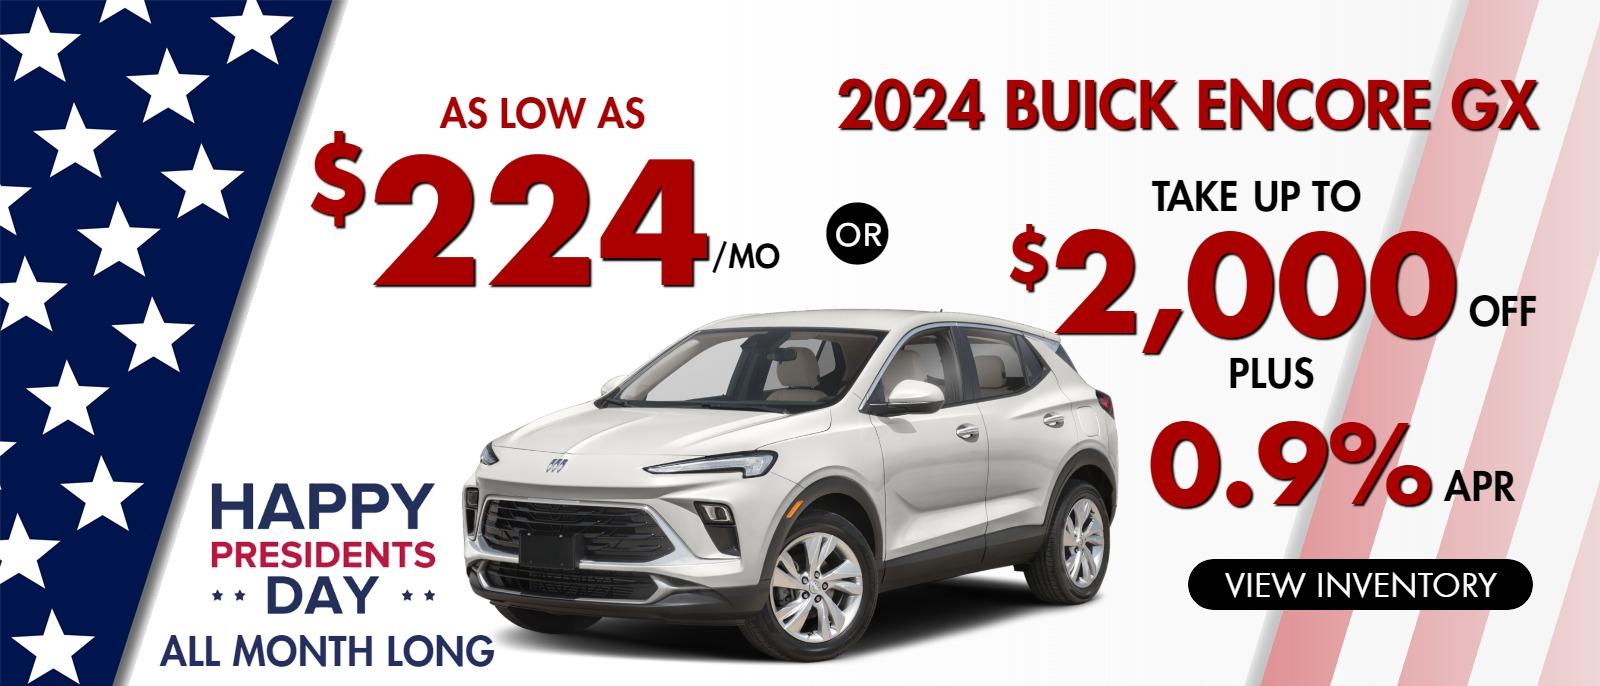 2024 Encore GX
Stock BA9280
AS LOW AS
$224/mo 
OR
take up to $2000 OFF 
& 0.9% finance